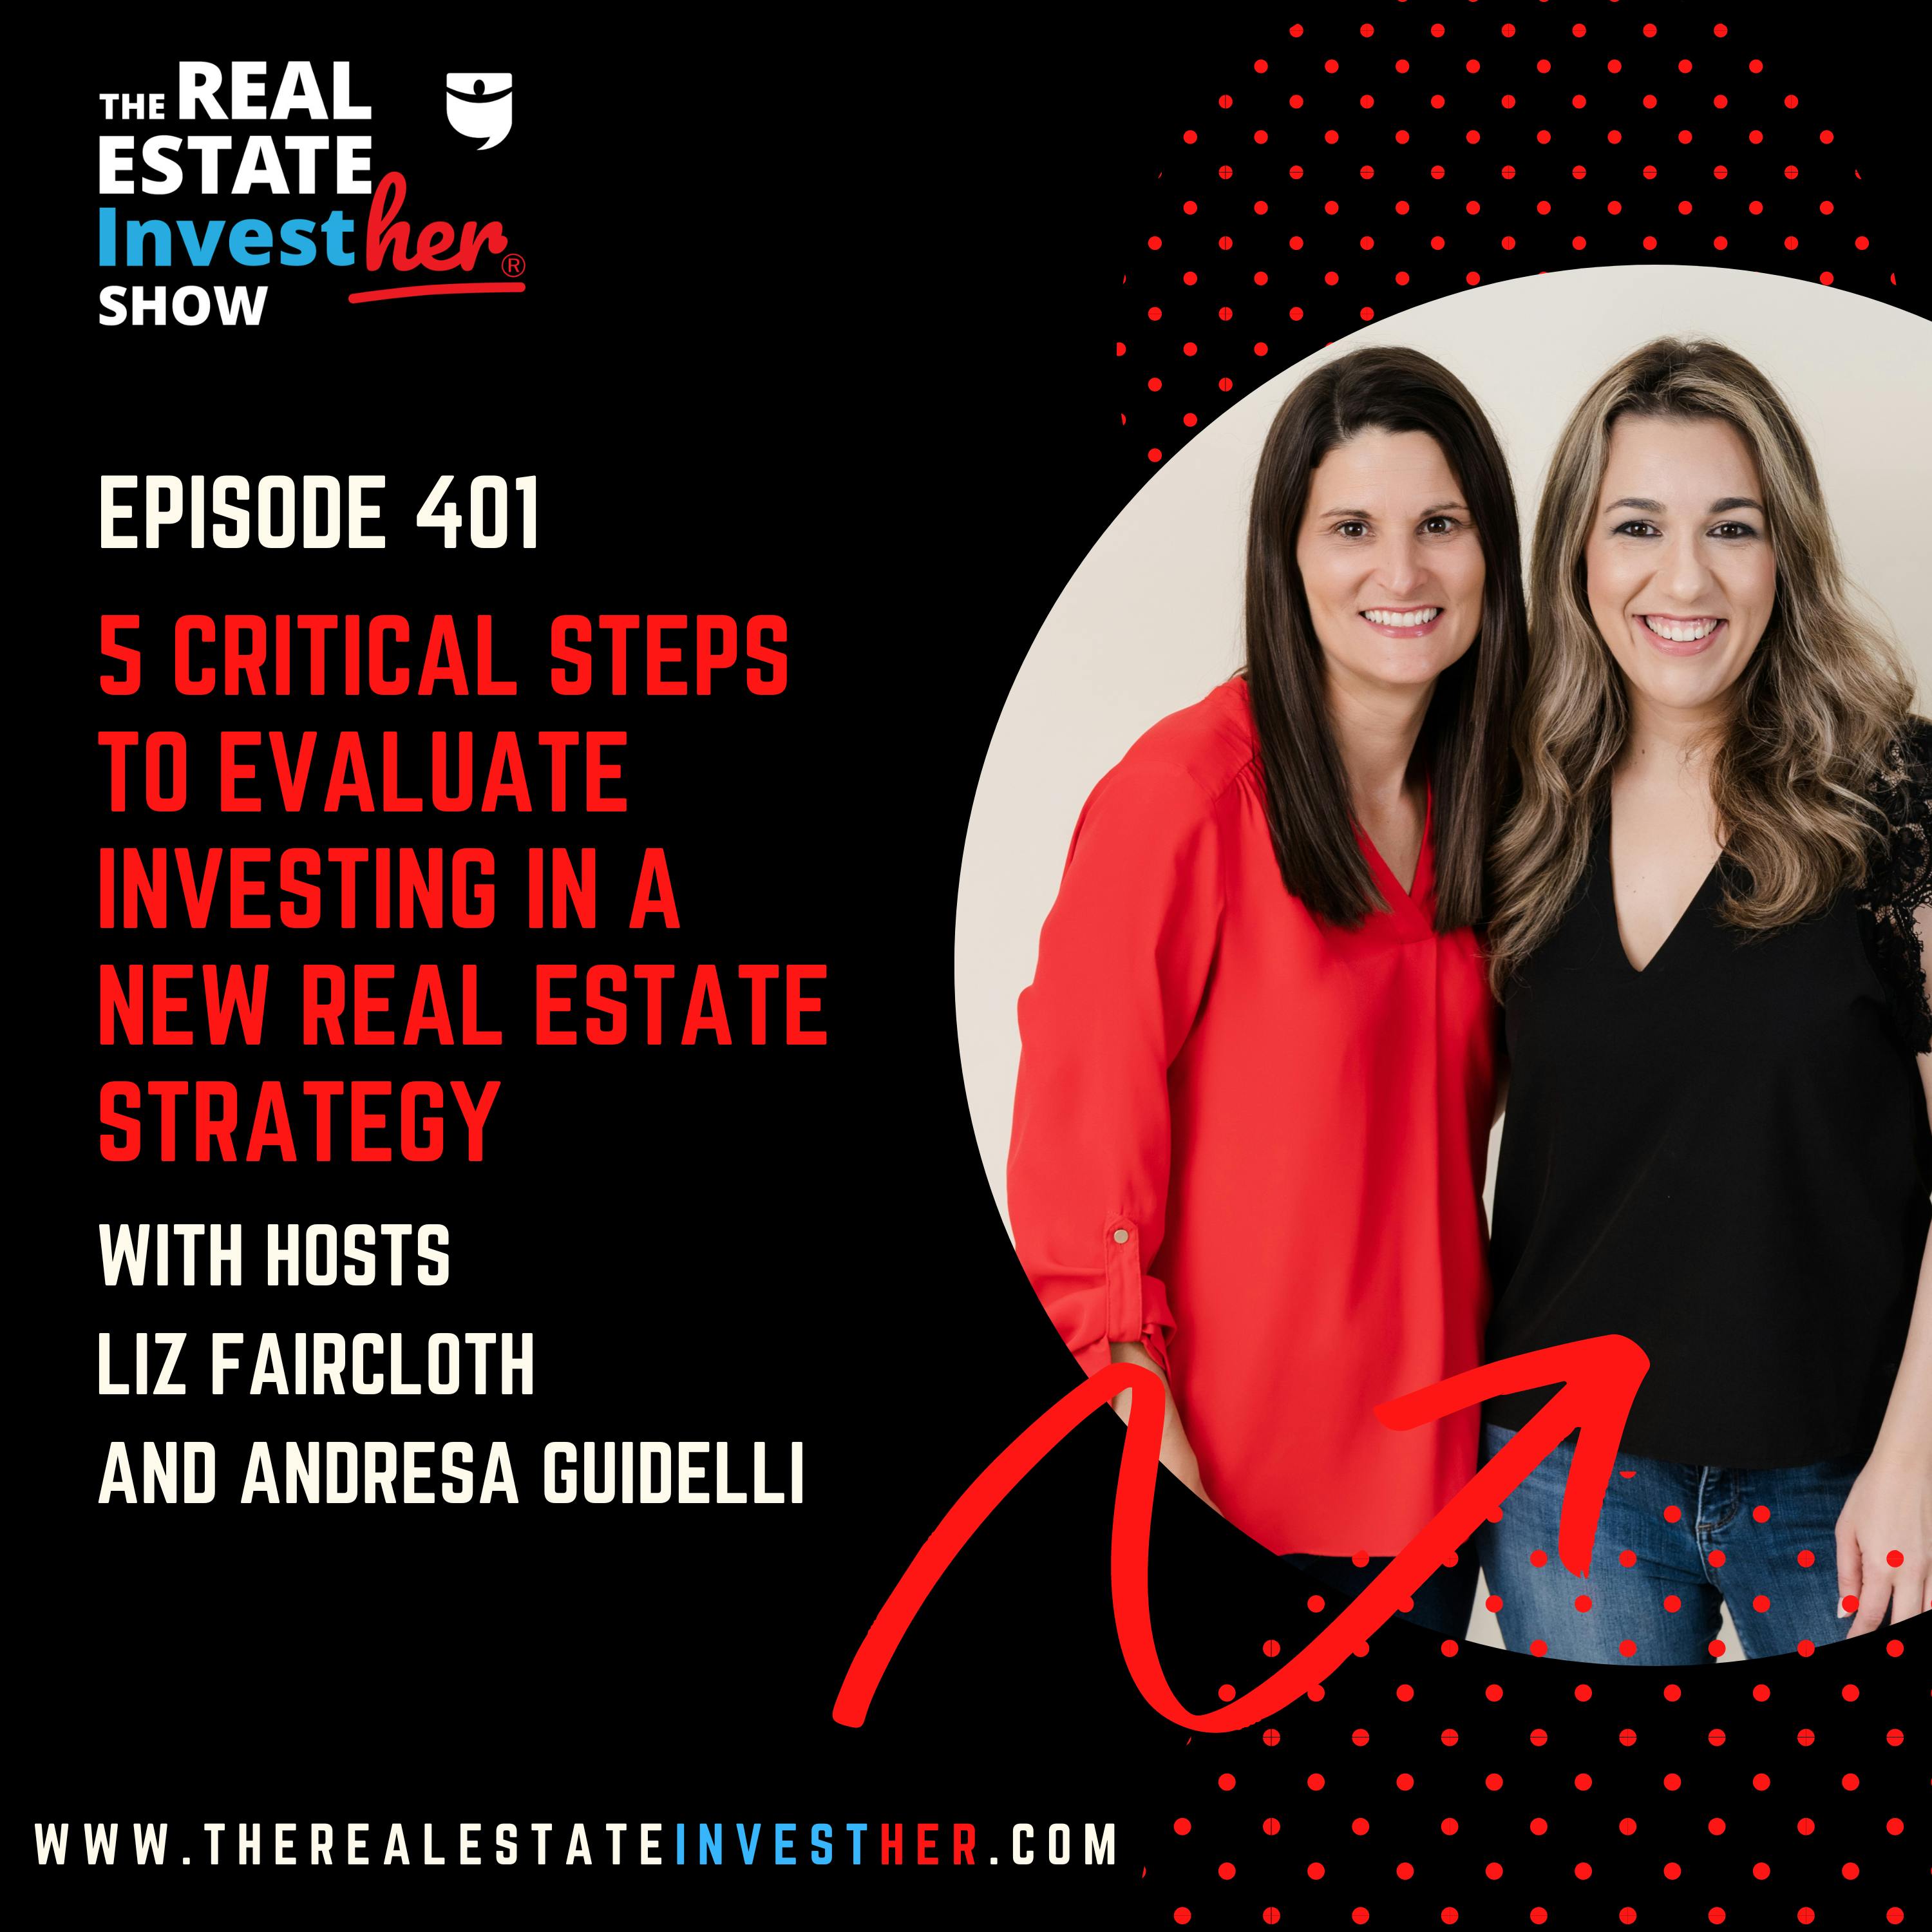 5 critical steps to evaluate investing in a new real estate strategy (Minisode)